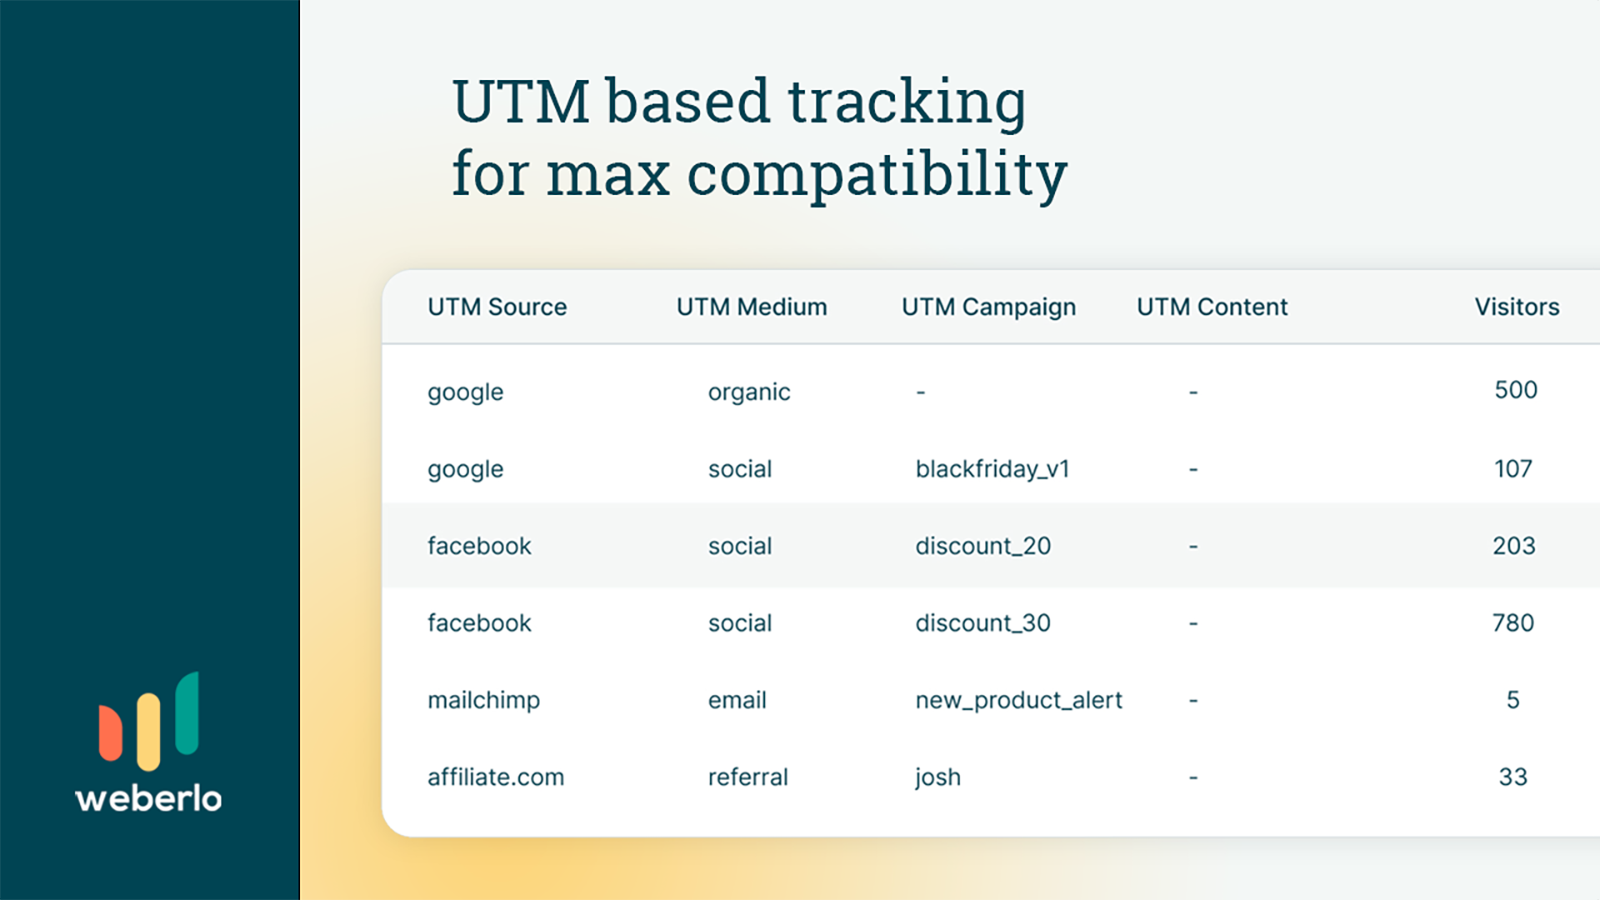 UTM based tracking for max compatibility